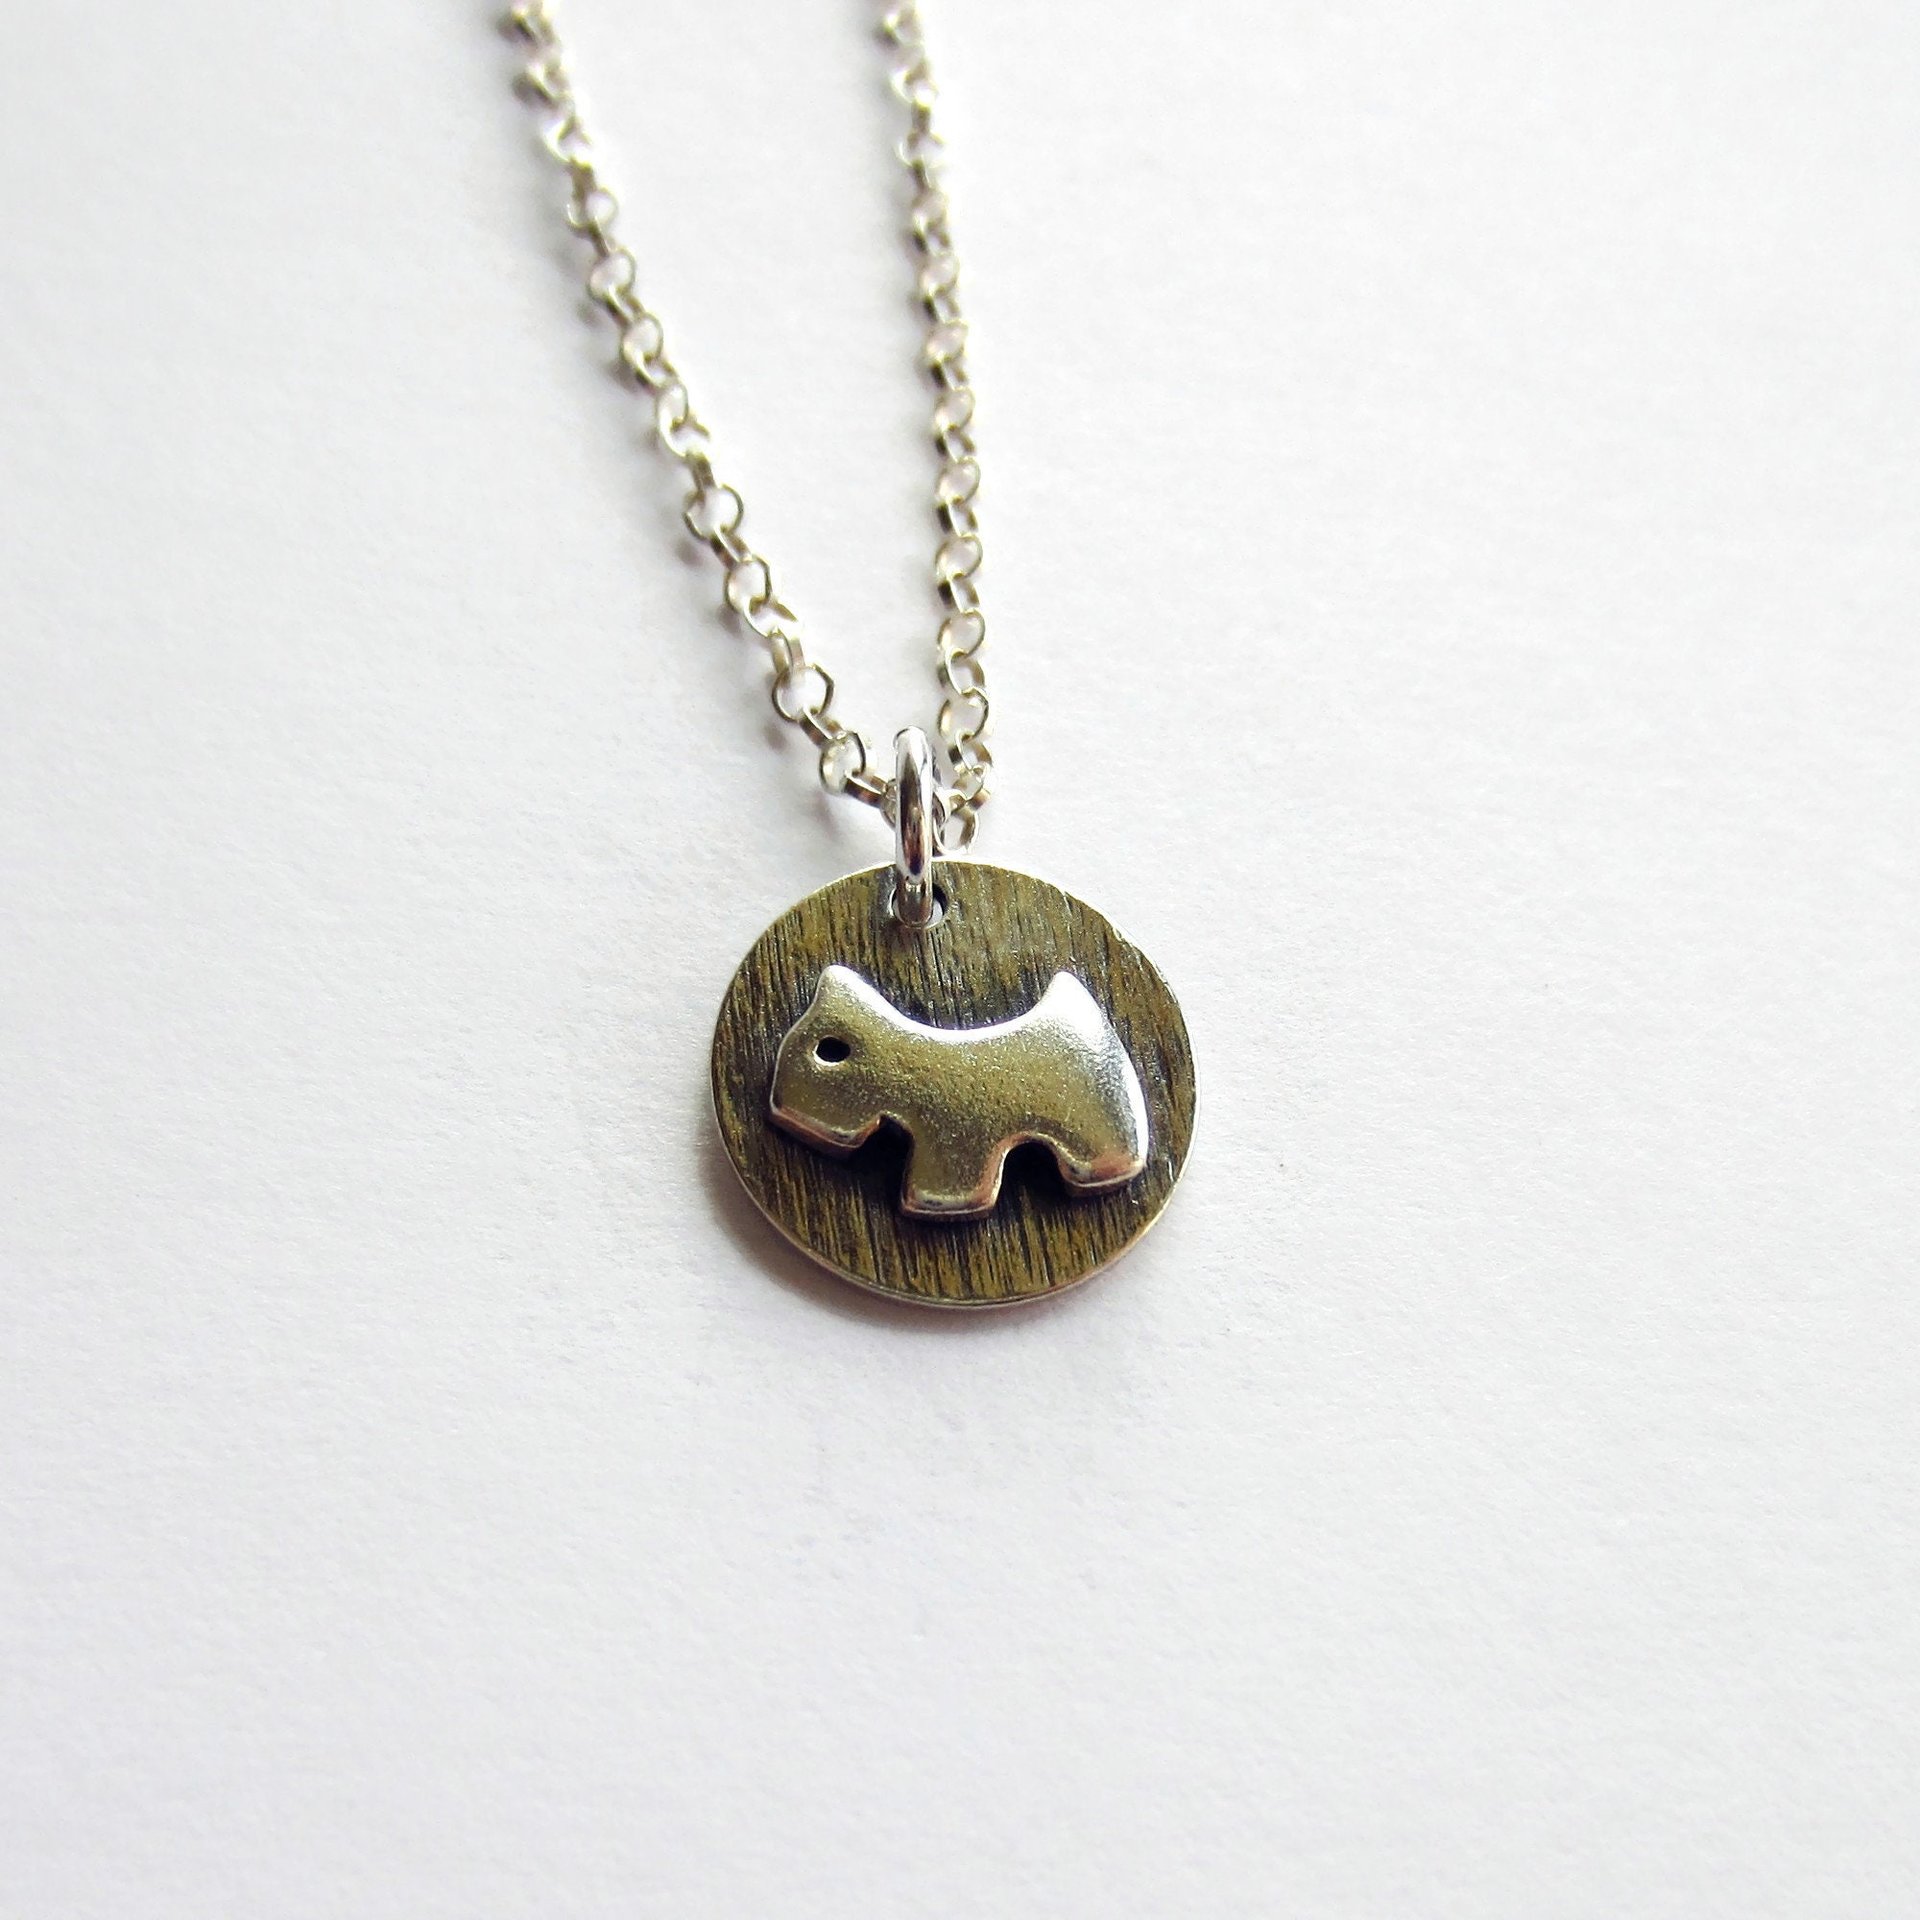 Cute Terrier Dog Necklace ~ Fine Silver and Sterling Silver ~ Handmade by The Tiny Tree Frog Jewellery